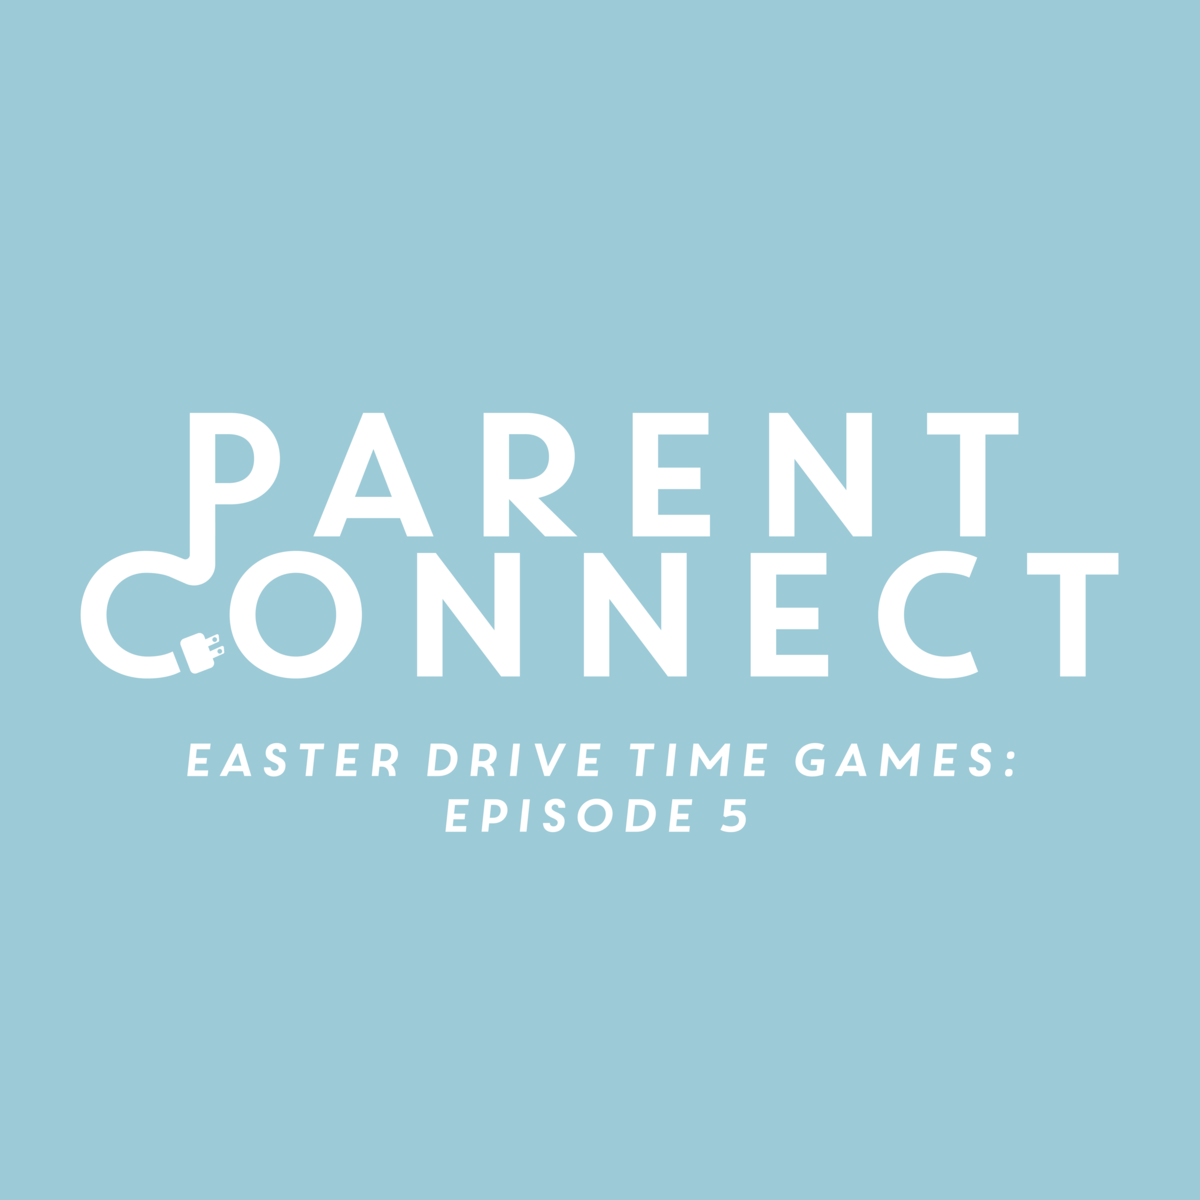 Easter Drive Time Games: Episode 5